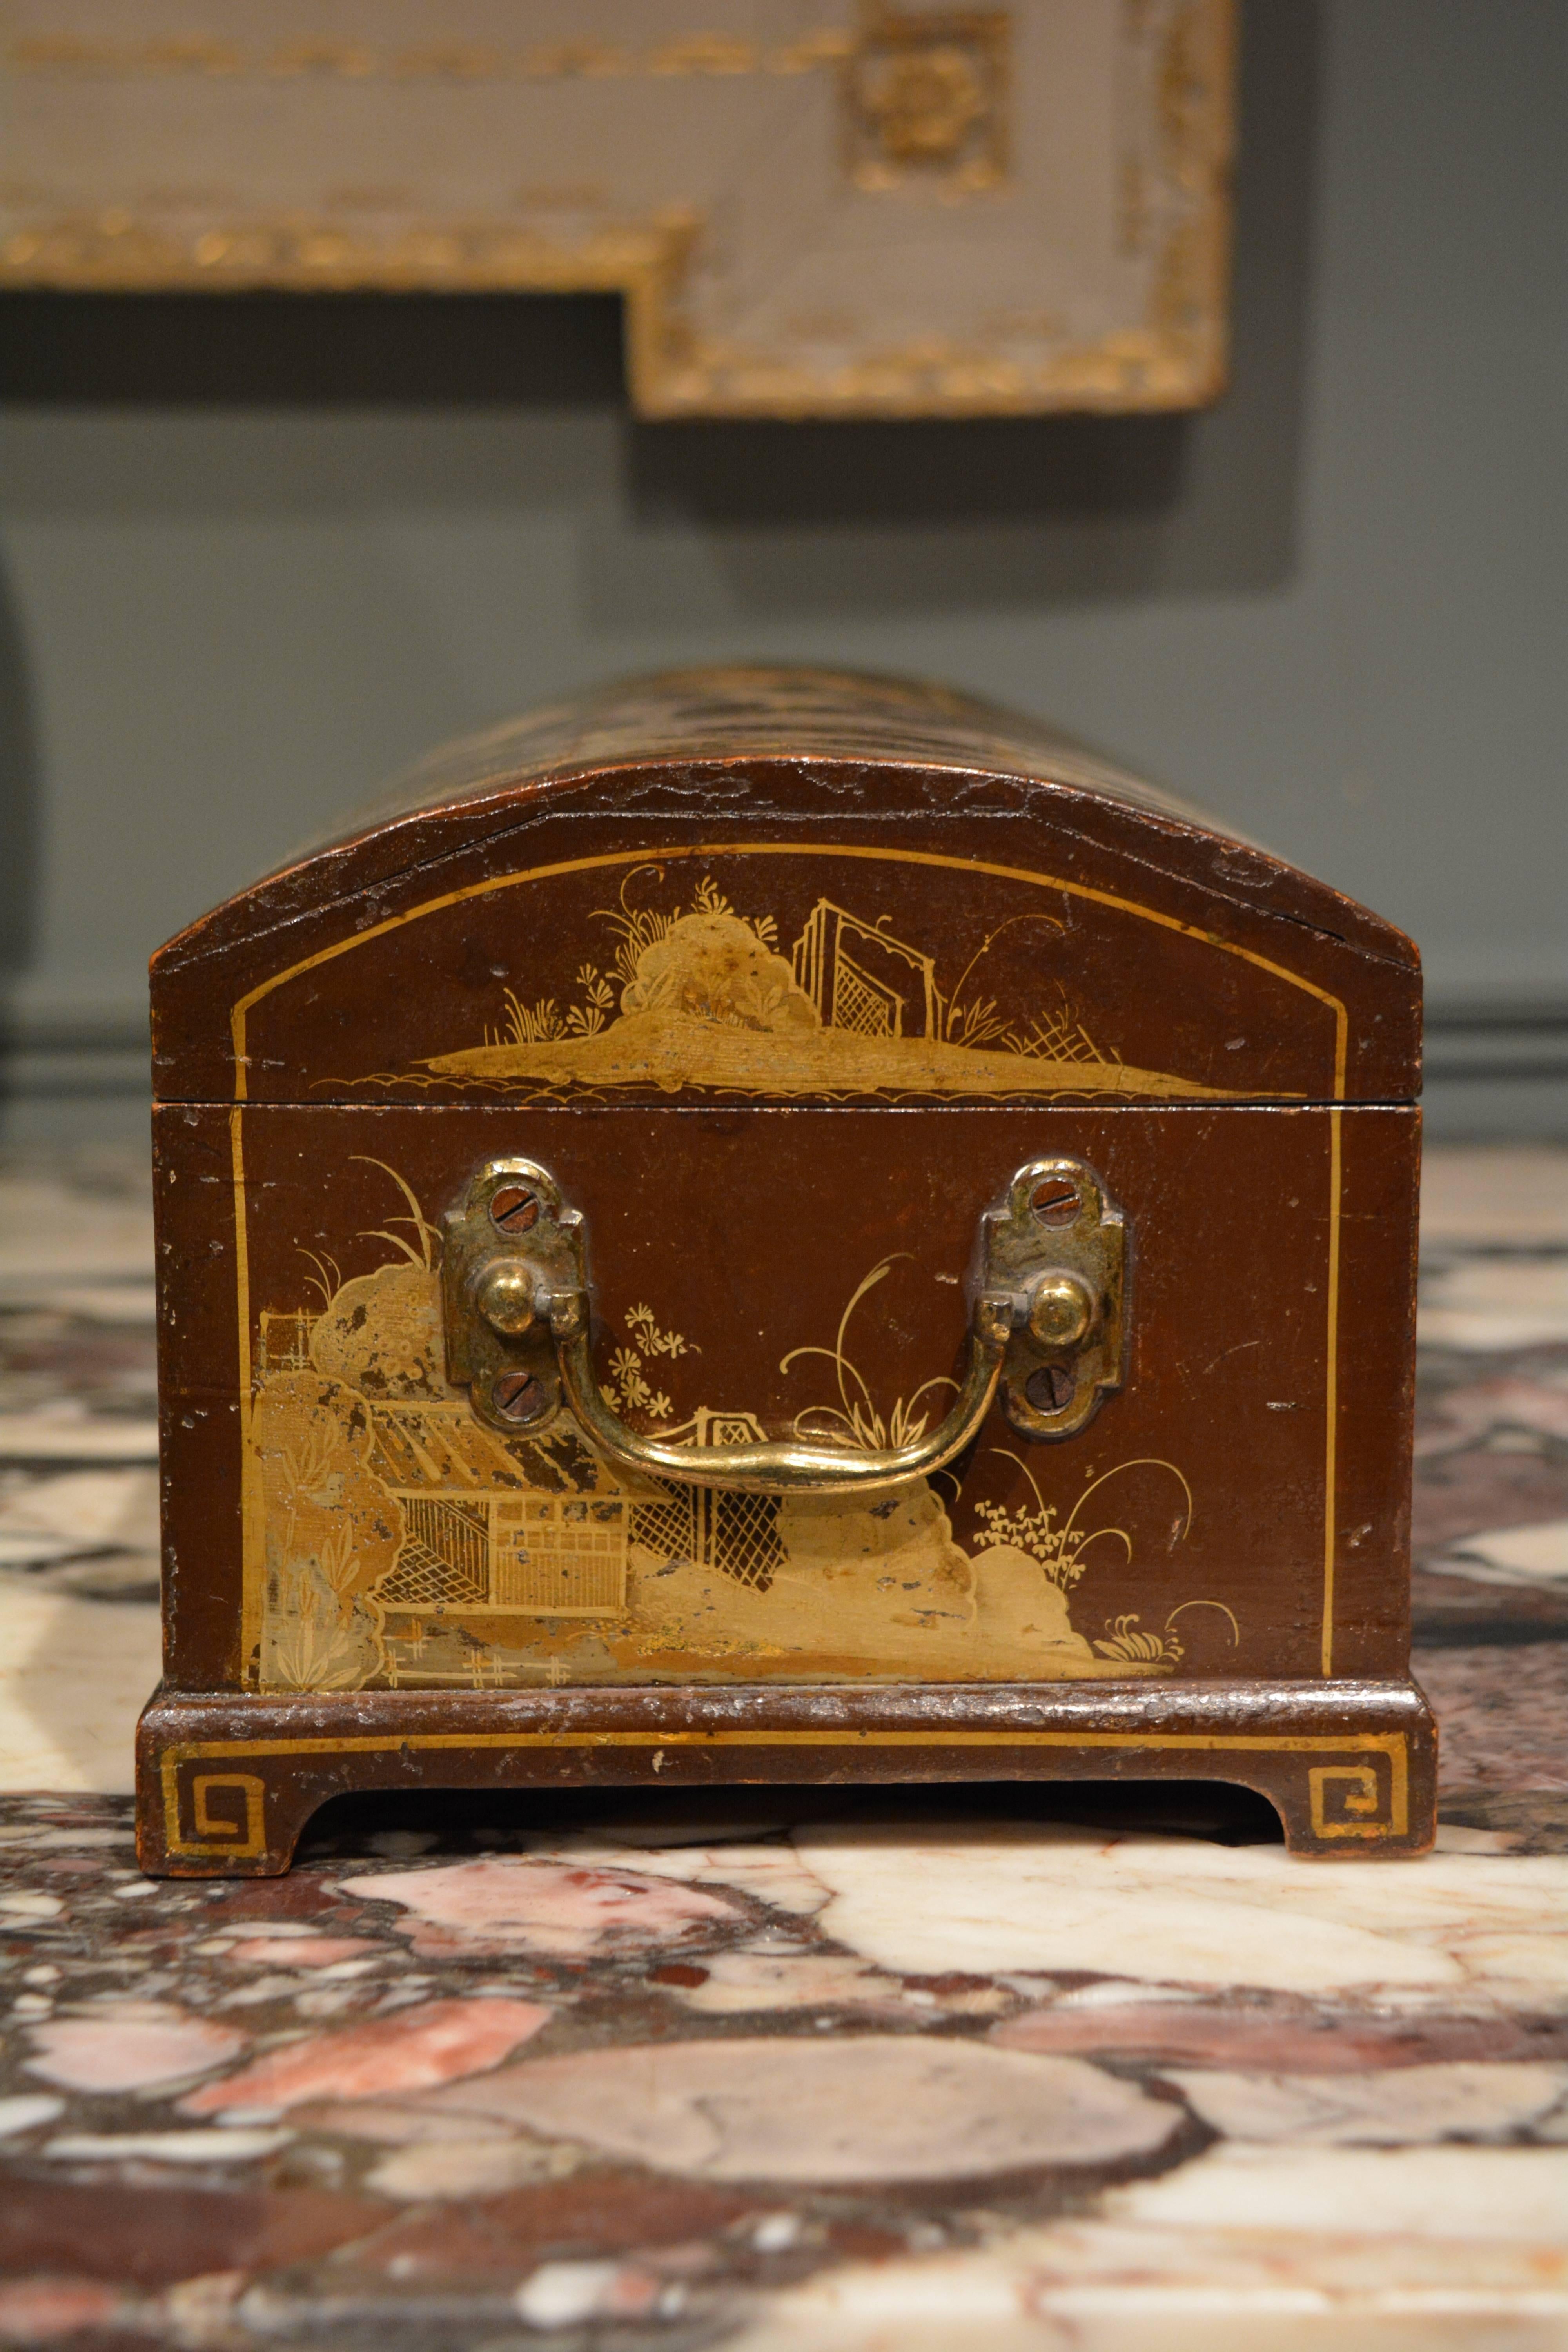 An early japanned dome top casket, the brown ground finely decorated in gilt with oriental scenes, standing on bracket feet and having a finely engraved escutcheon with carrying handles to the end, English, circa 1720.